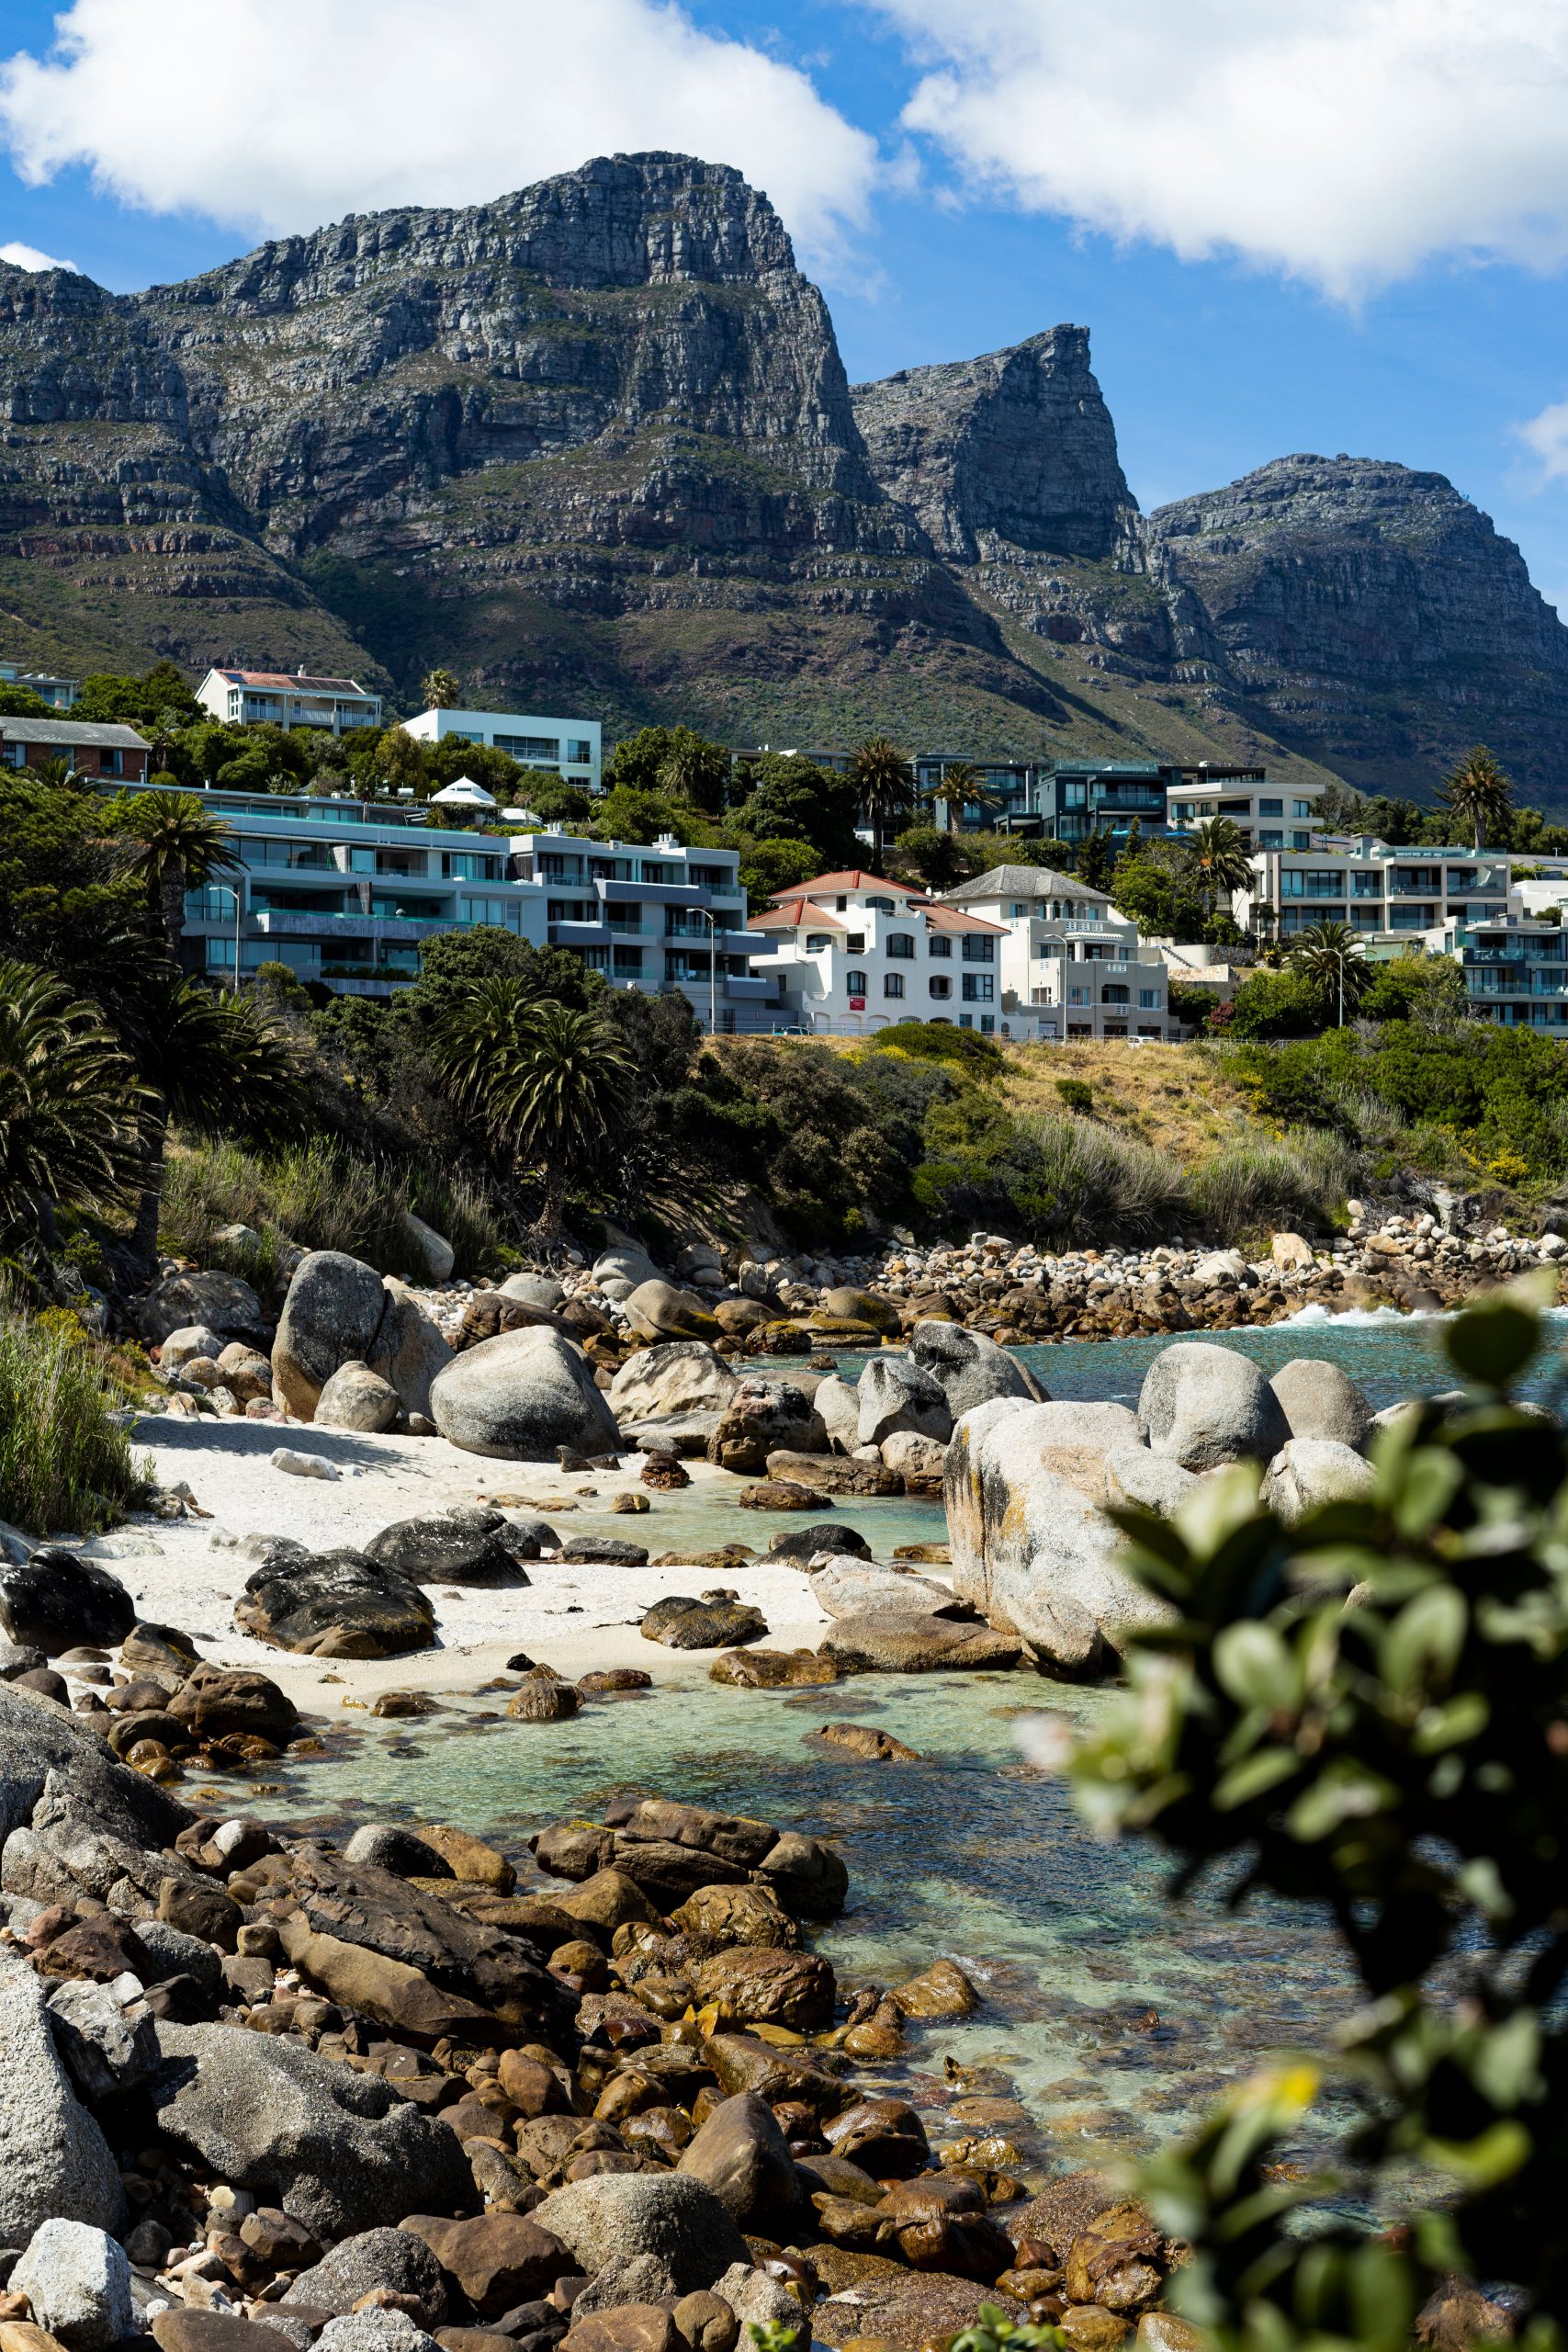 View to villas with Table Mountain in the background